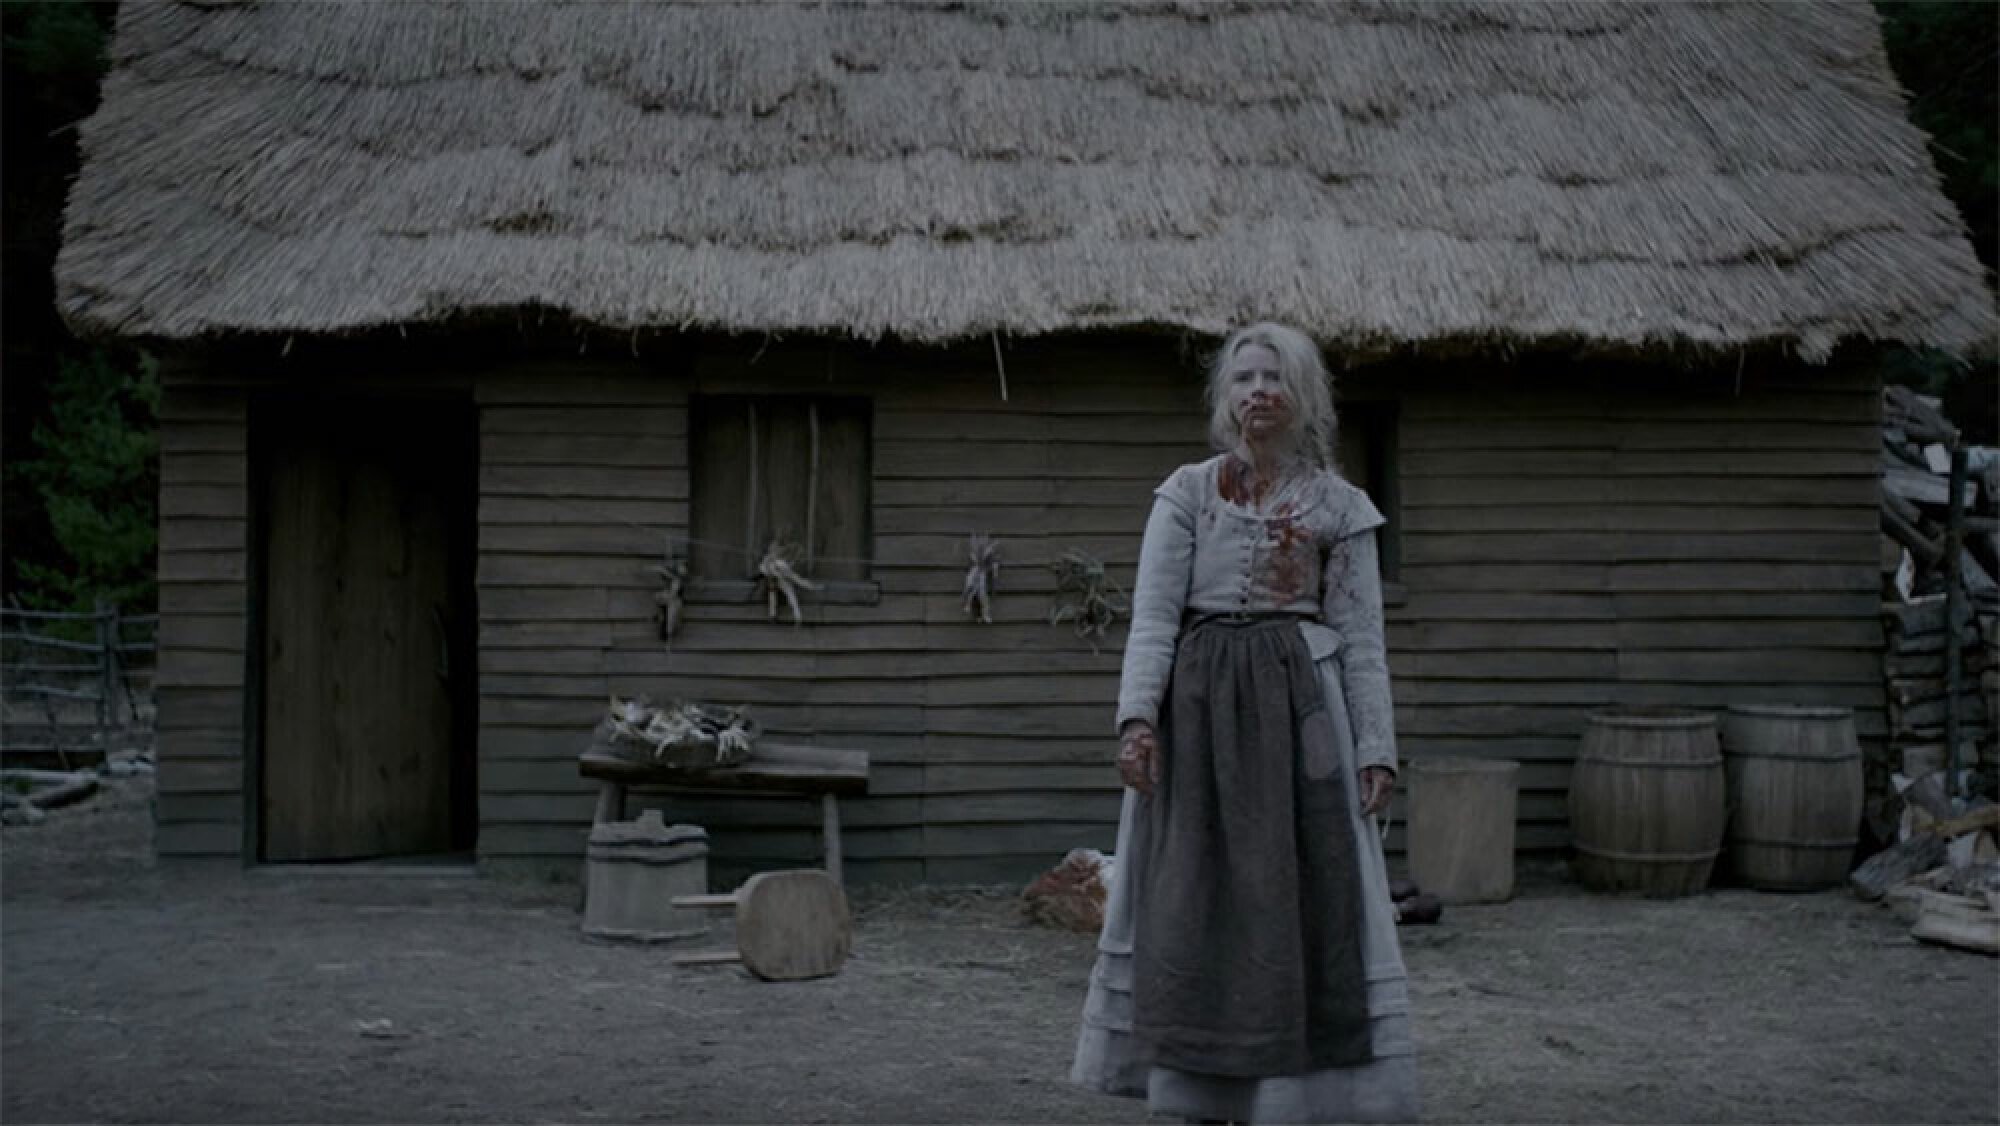 A woman covered in blood stands in front of an old thatched building.